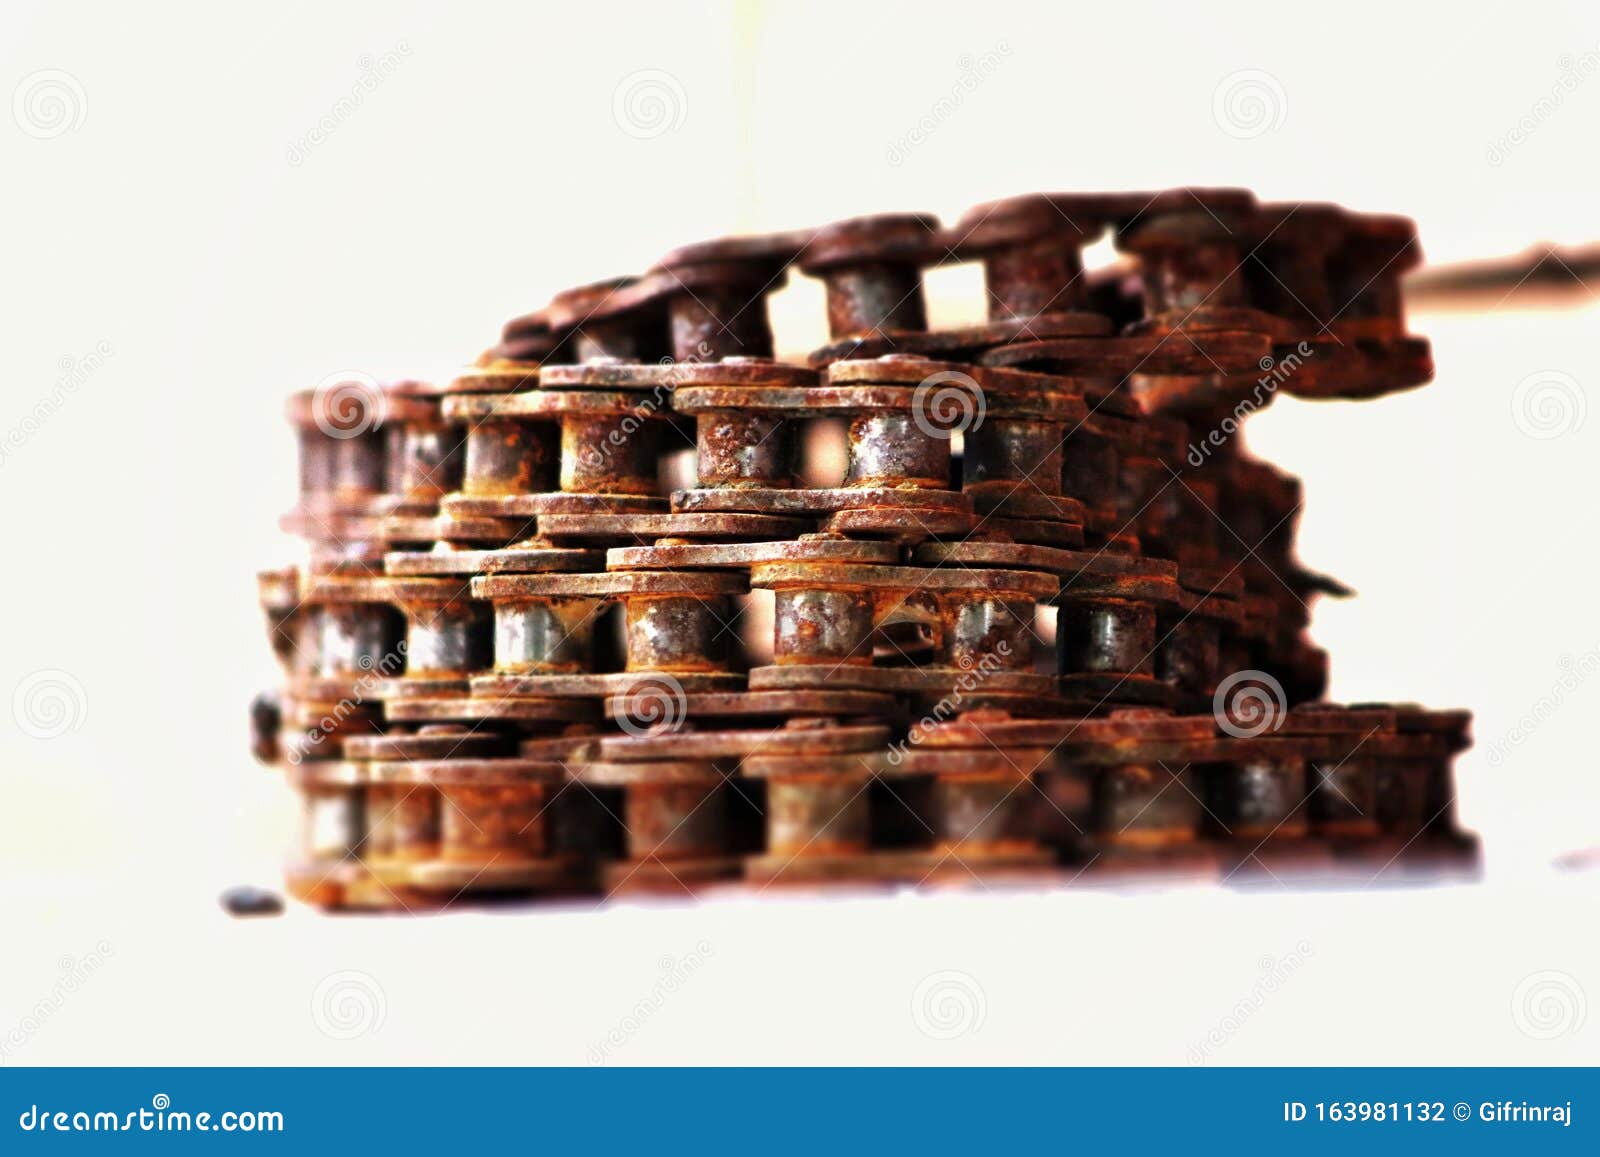 old rusted cycle chain in a white background